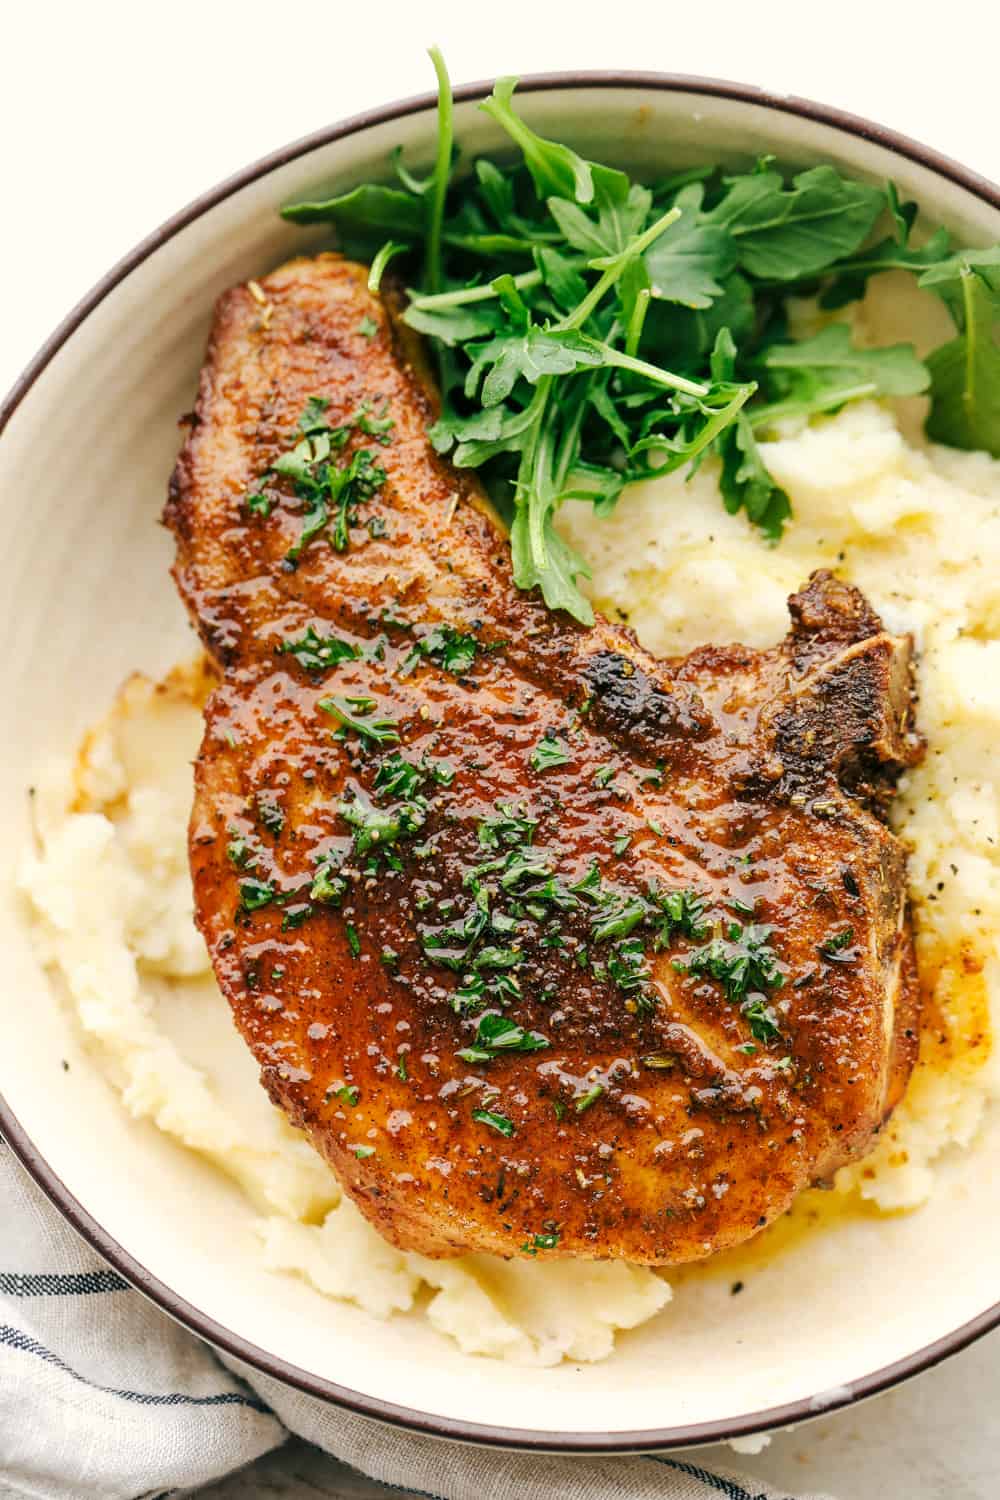 Juicy and tender air fryer Pork chops on a bed of mashed potatoes. 